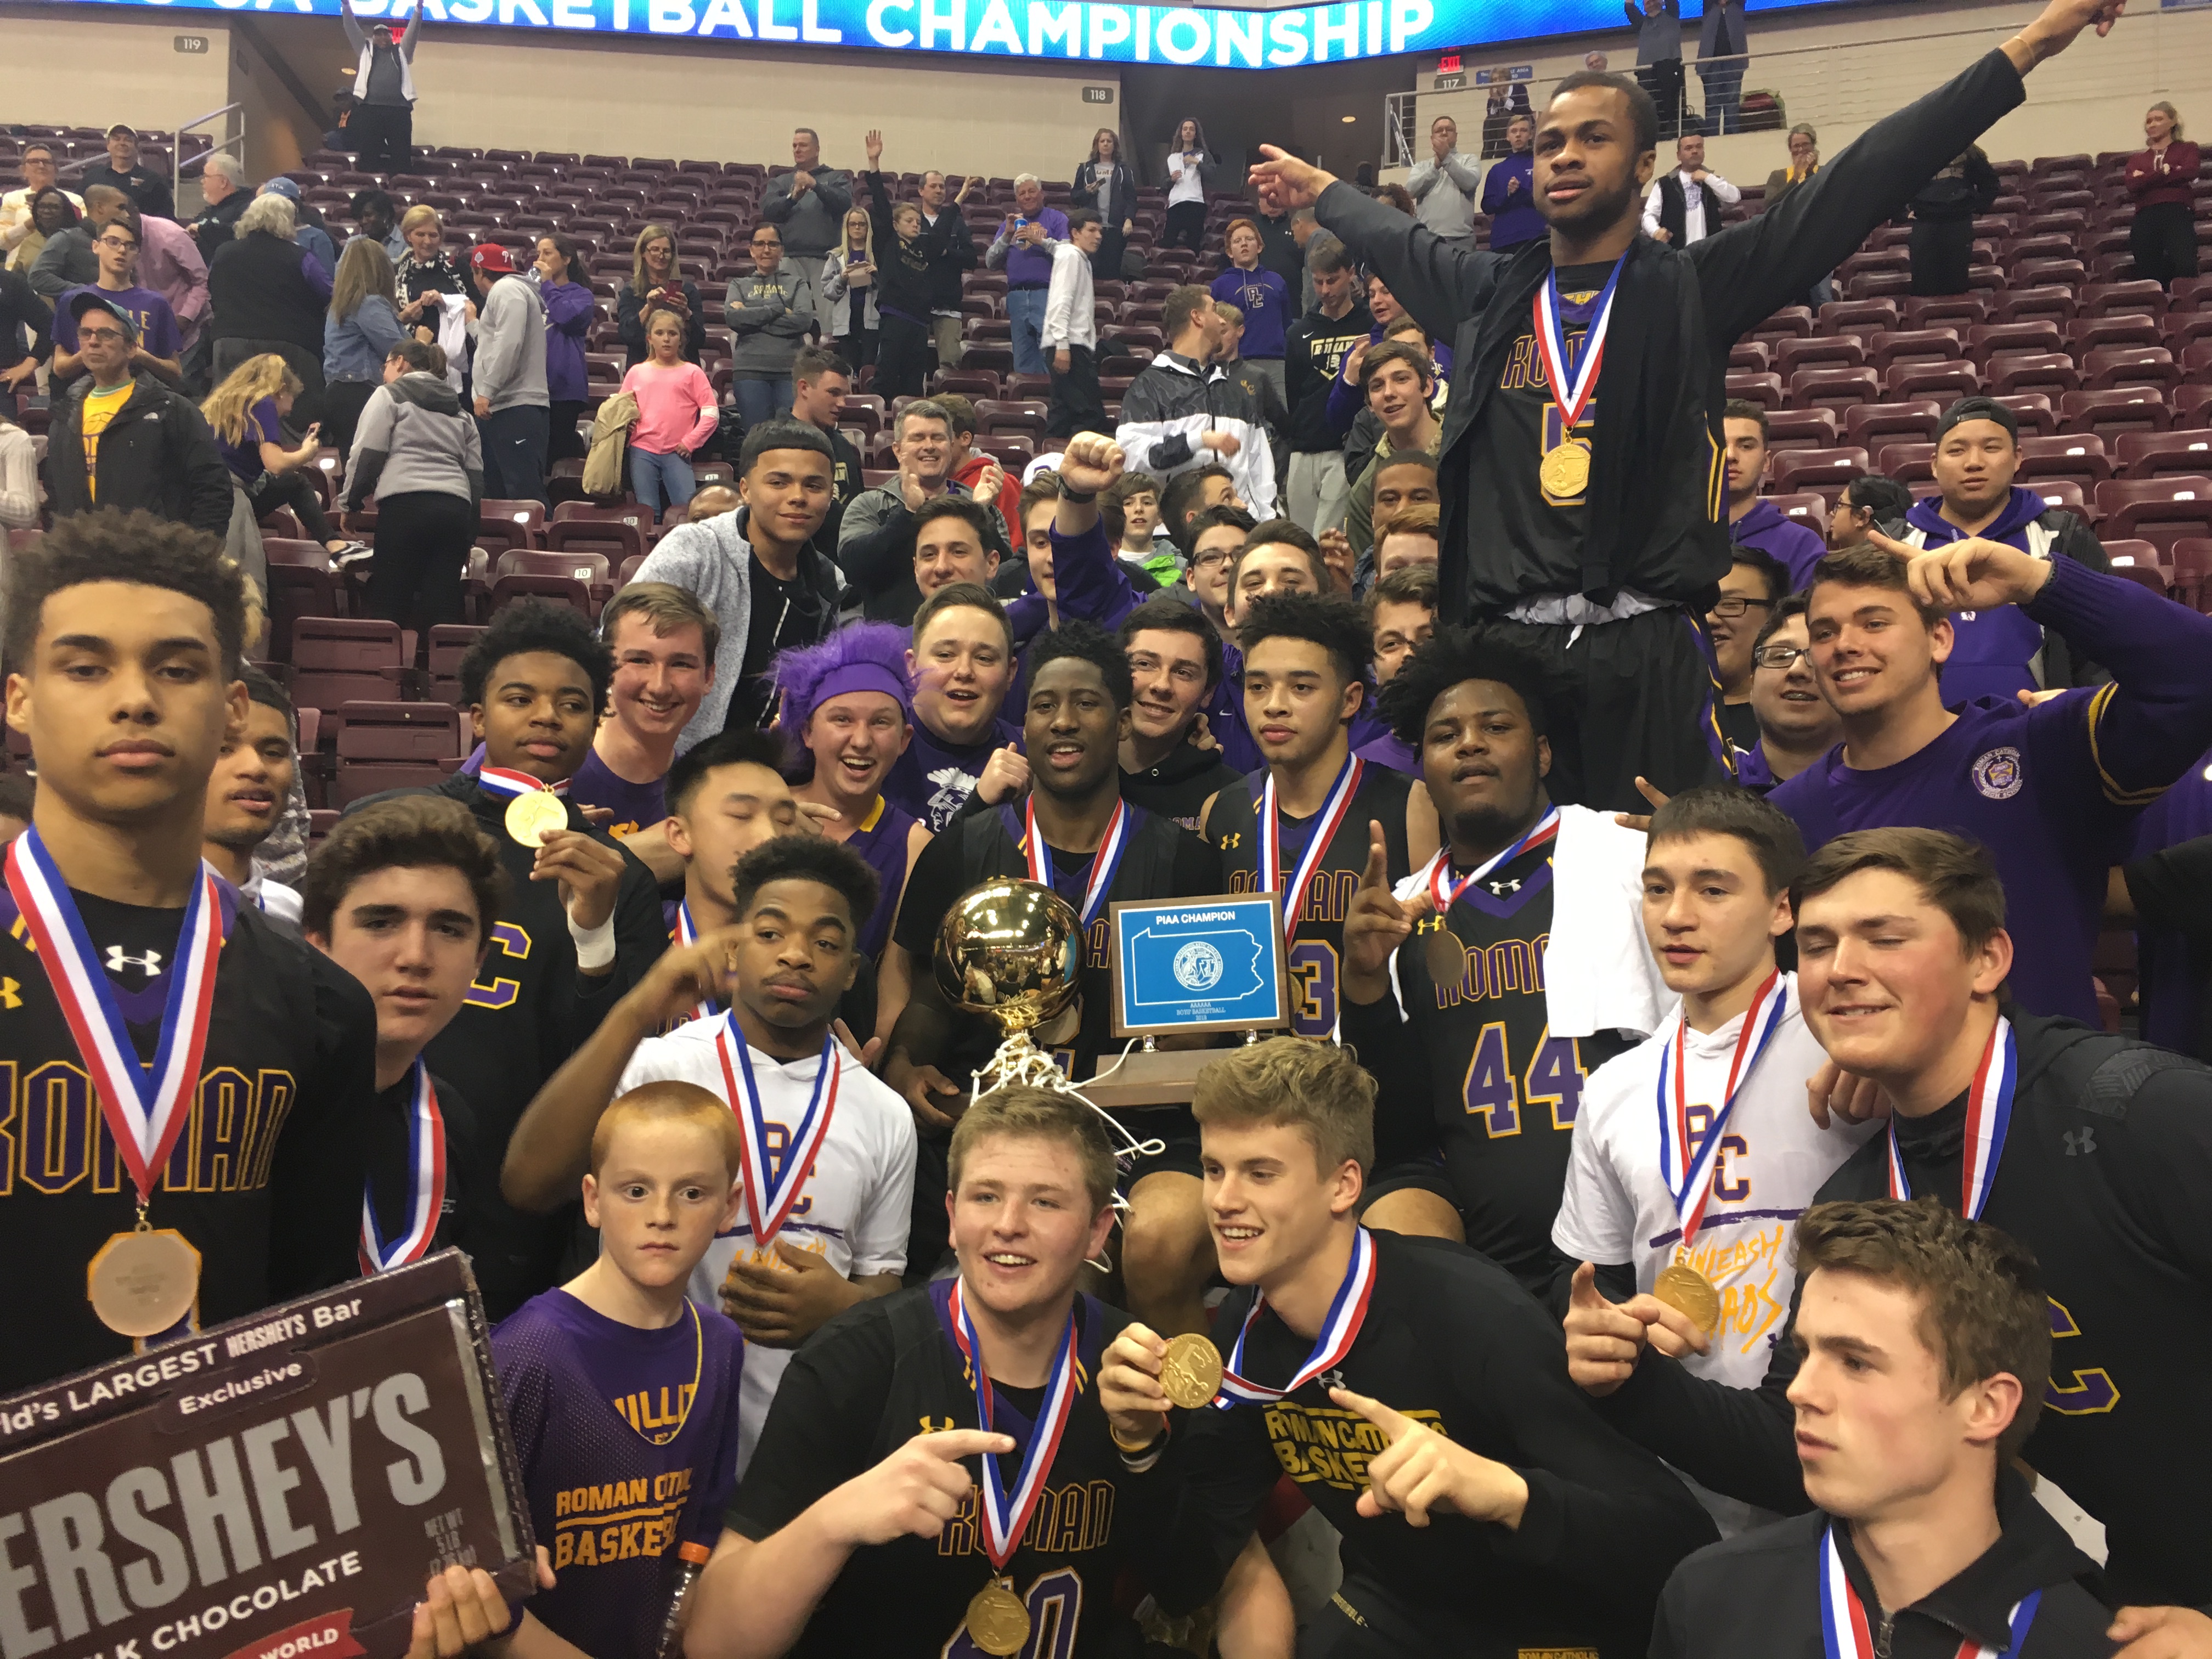 Roman Catholic’s PIAA-6A title adds new chapter to storied legacy ...